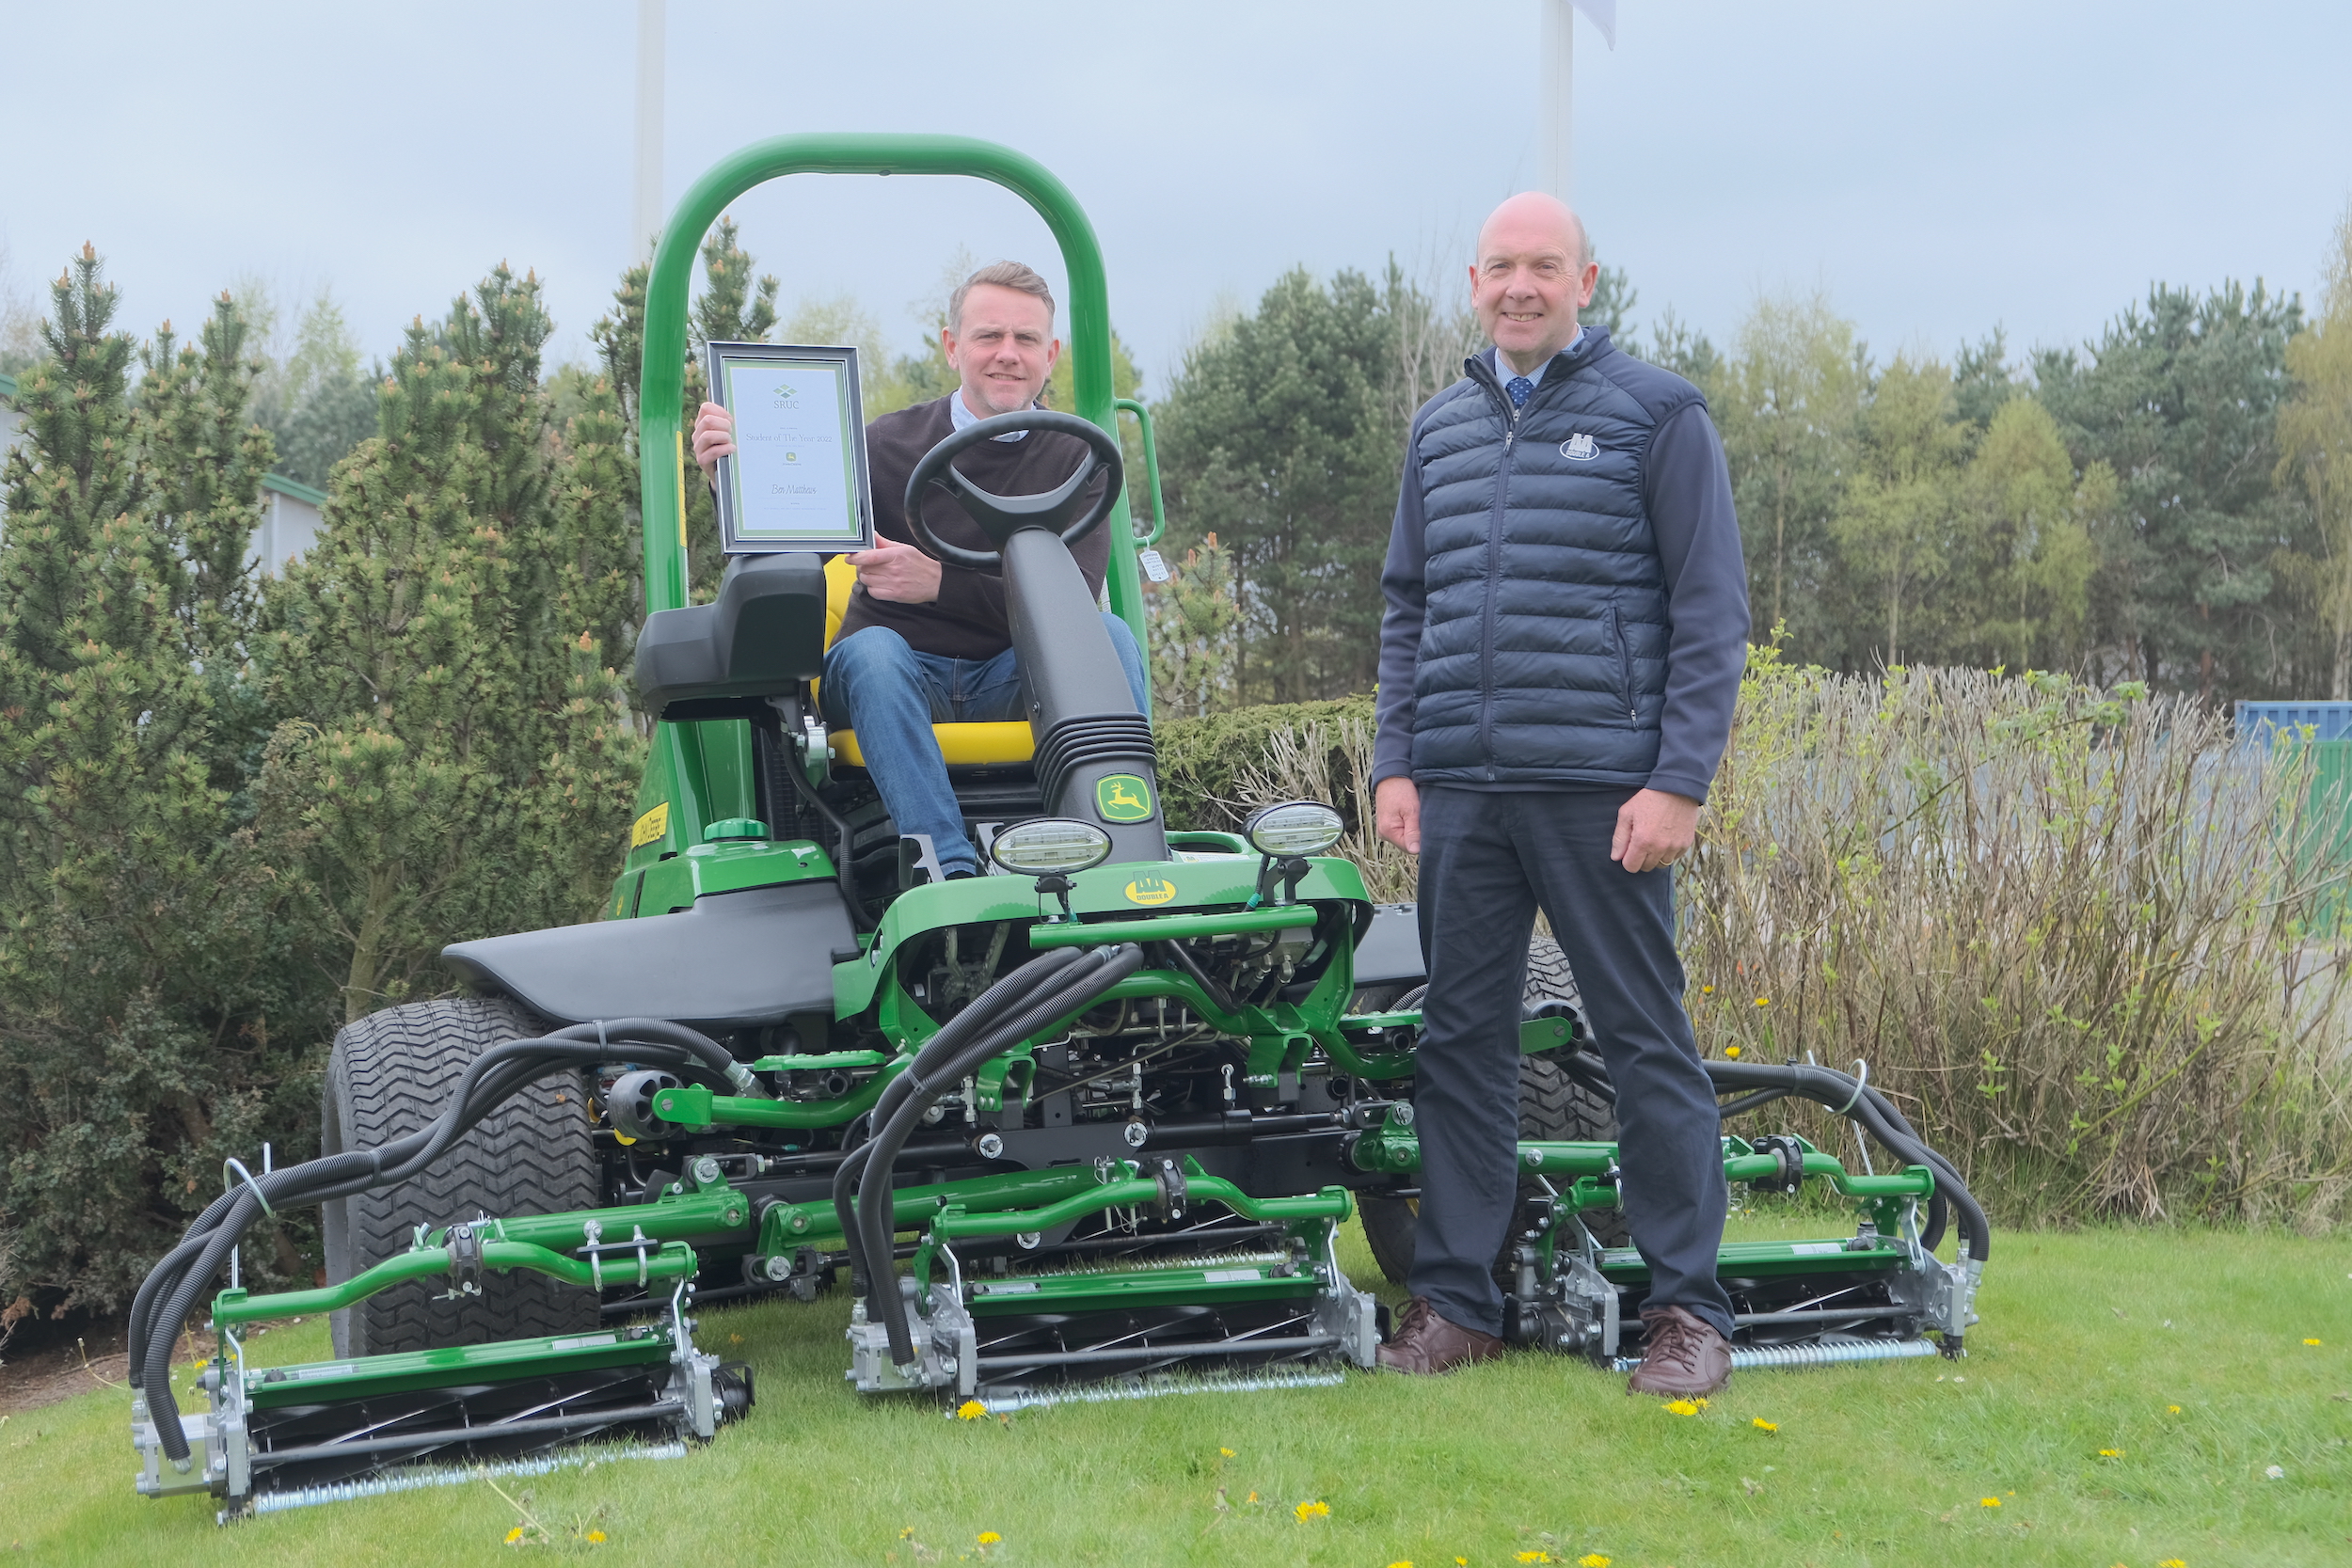 Change of careers leads to the home of golf for John Deere award winner